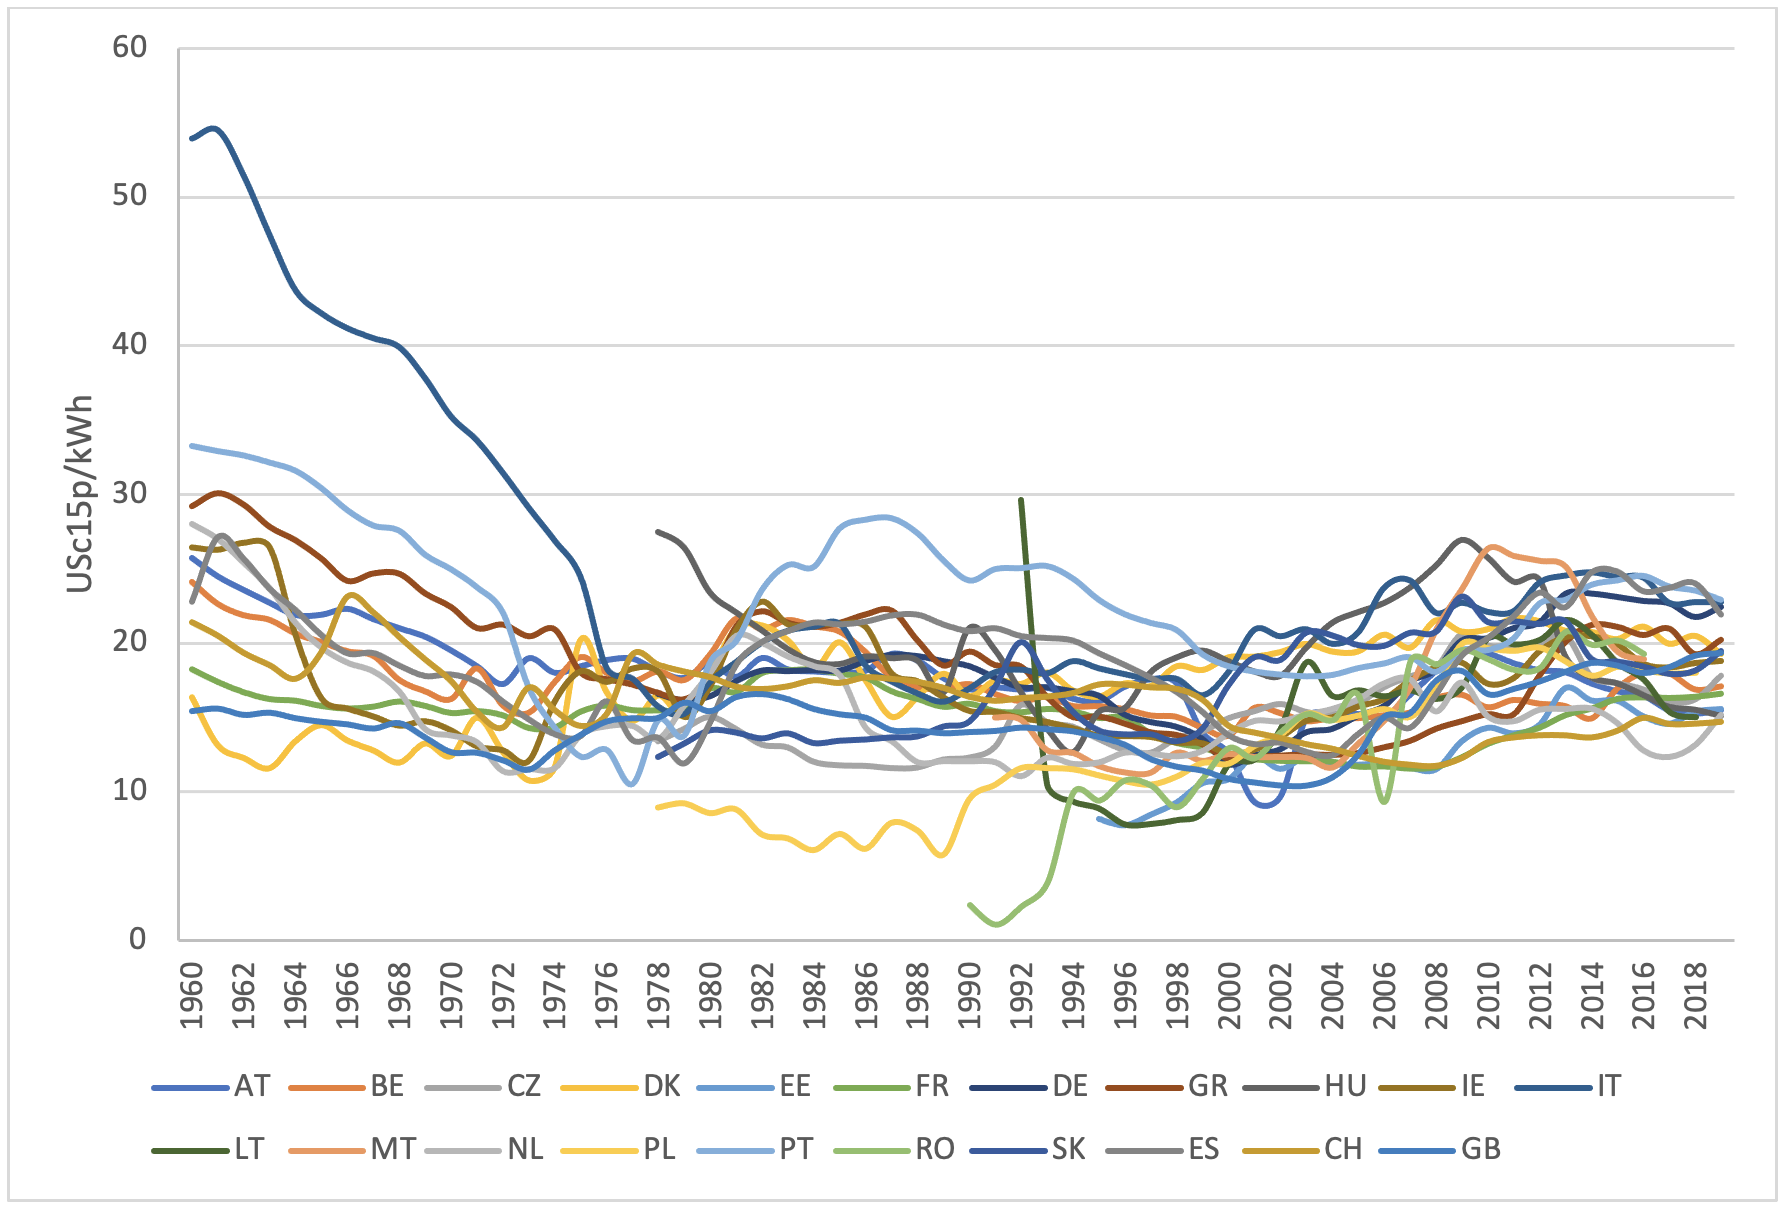 Figure 1. Economy-wide real electricity prices for many European countries, 1960-2019 (unbalanced).